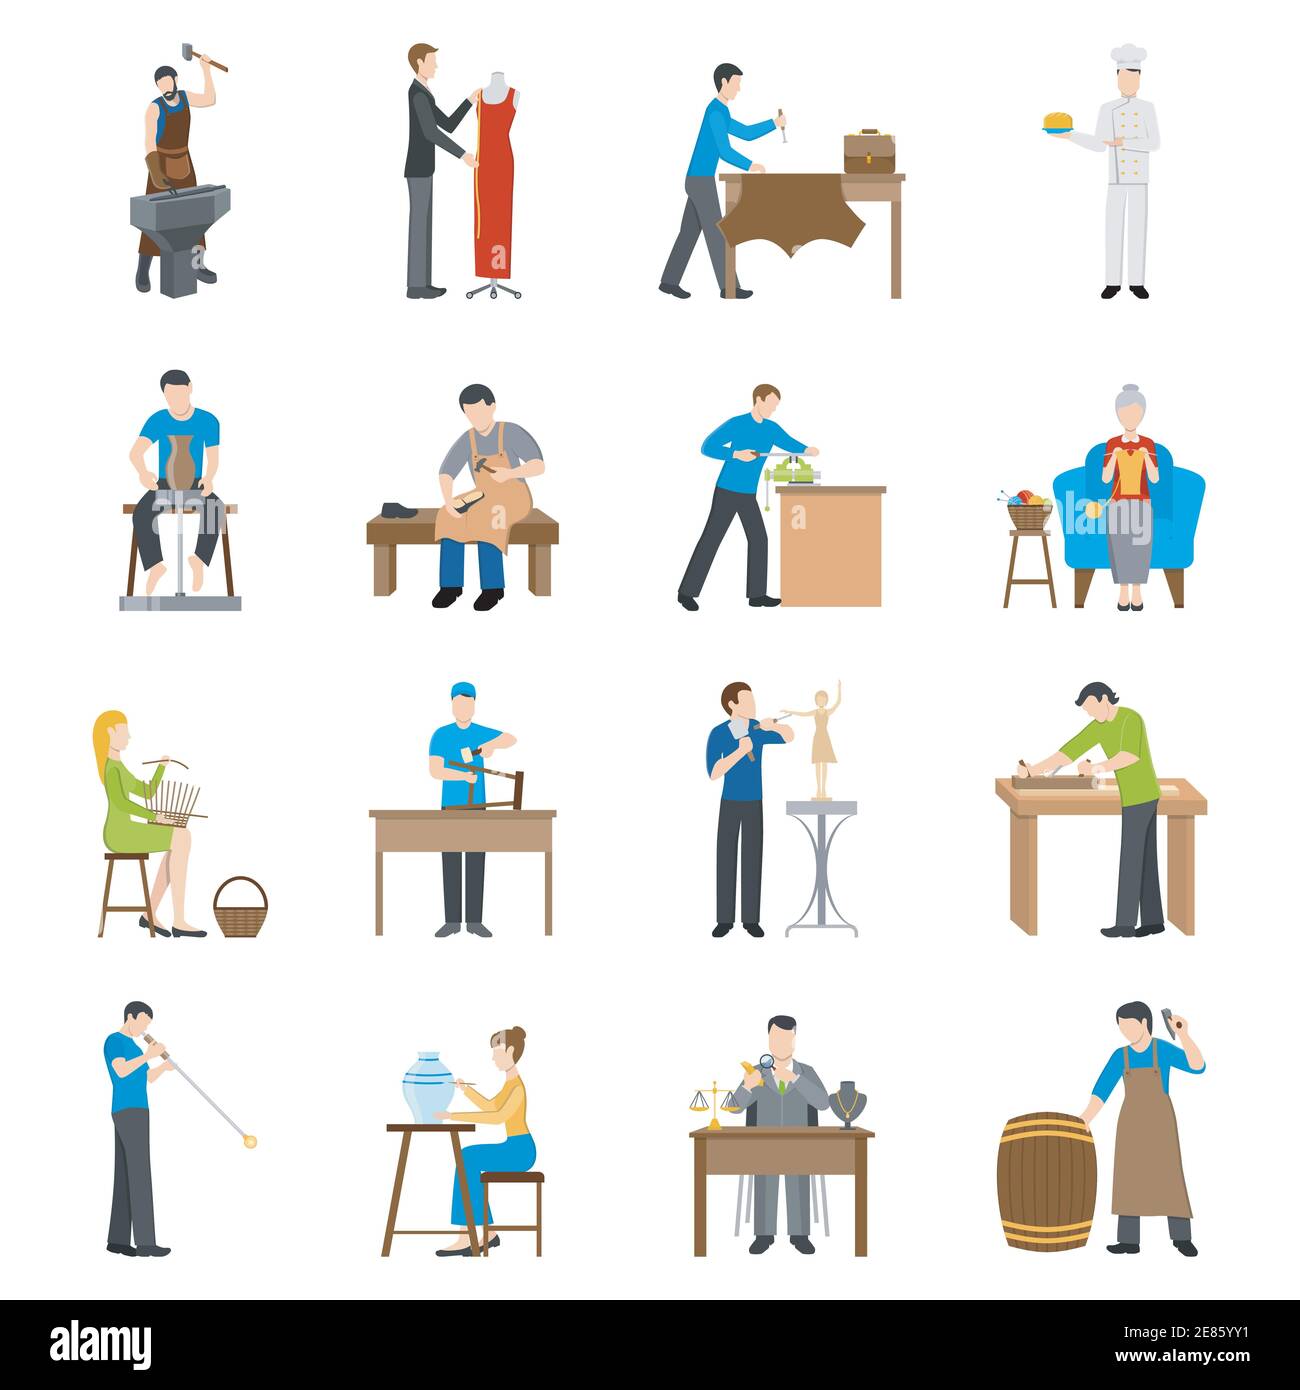 Flat design craftsmen icons with people having various professions isolated on white background vector illustration Stock Vector